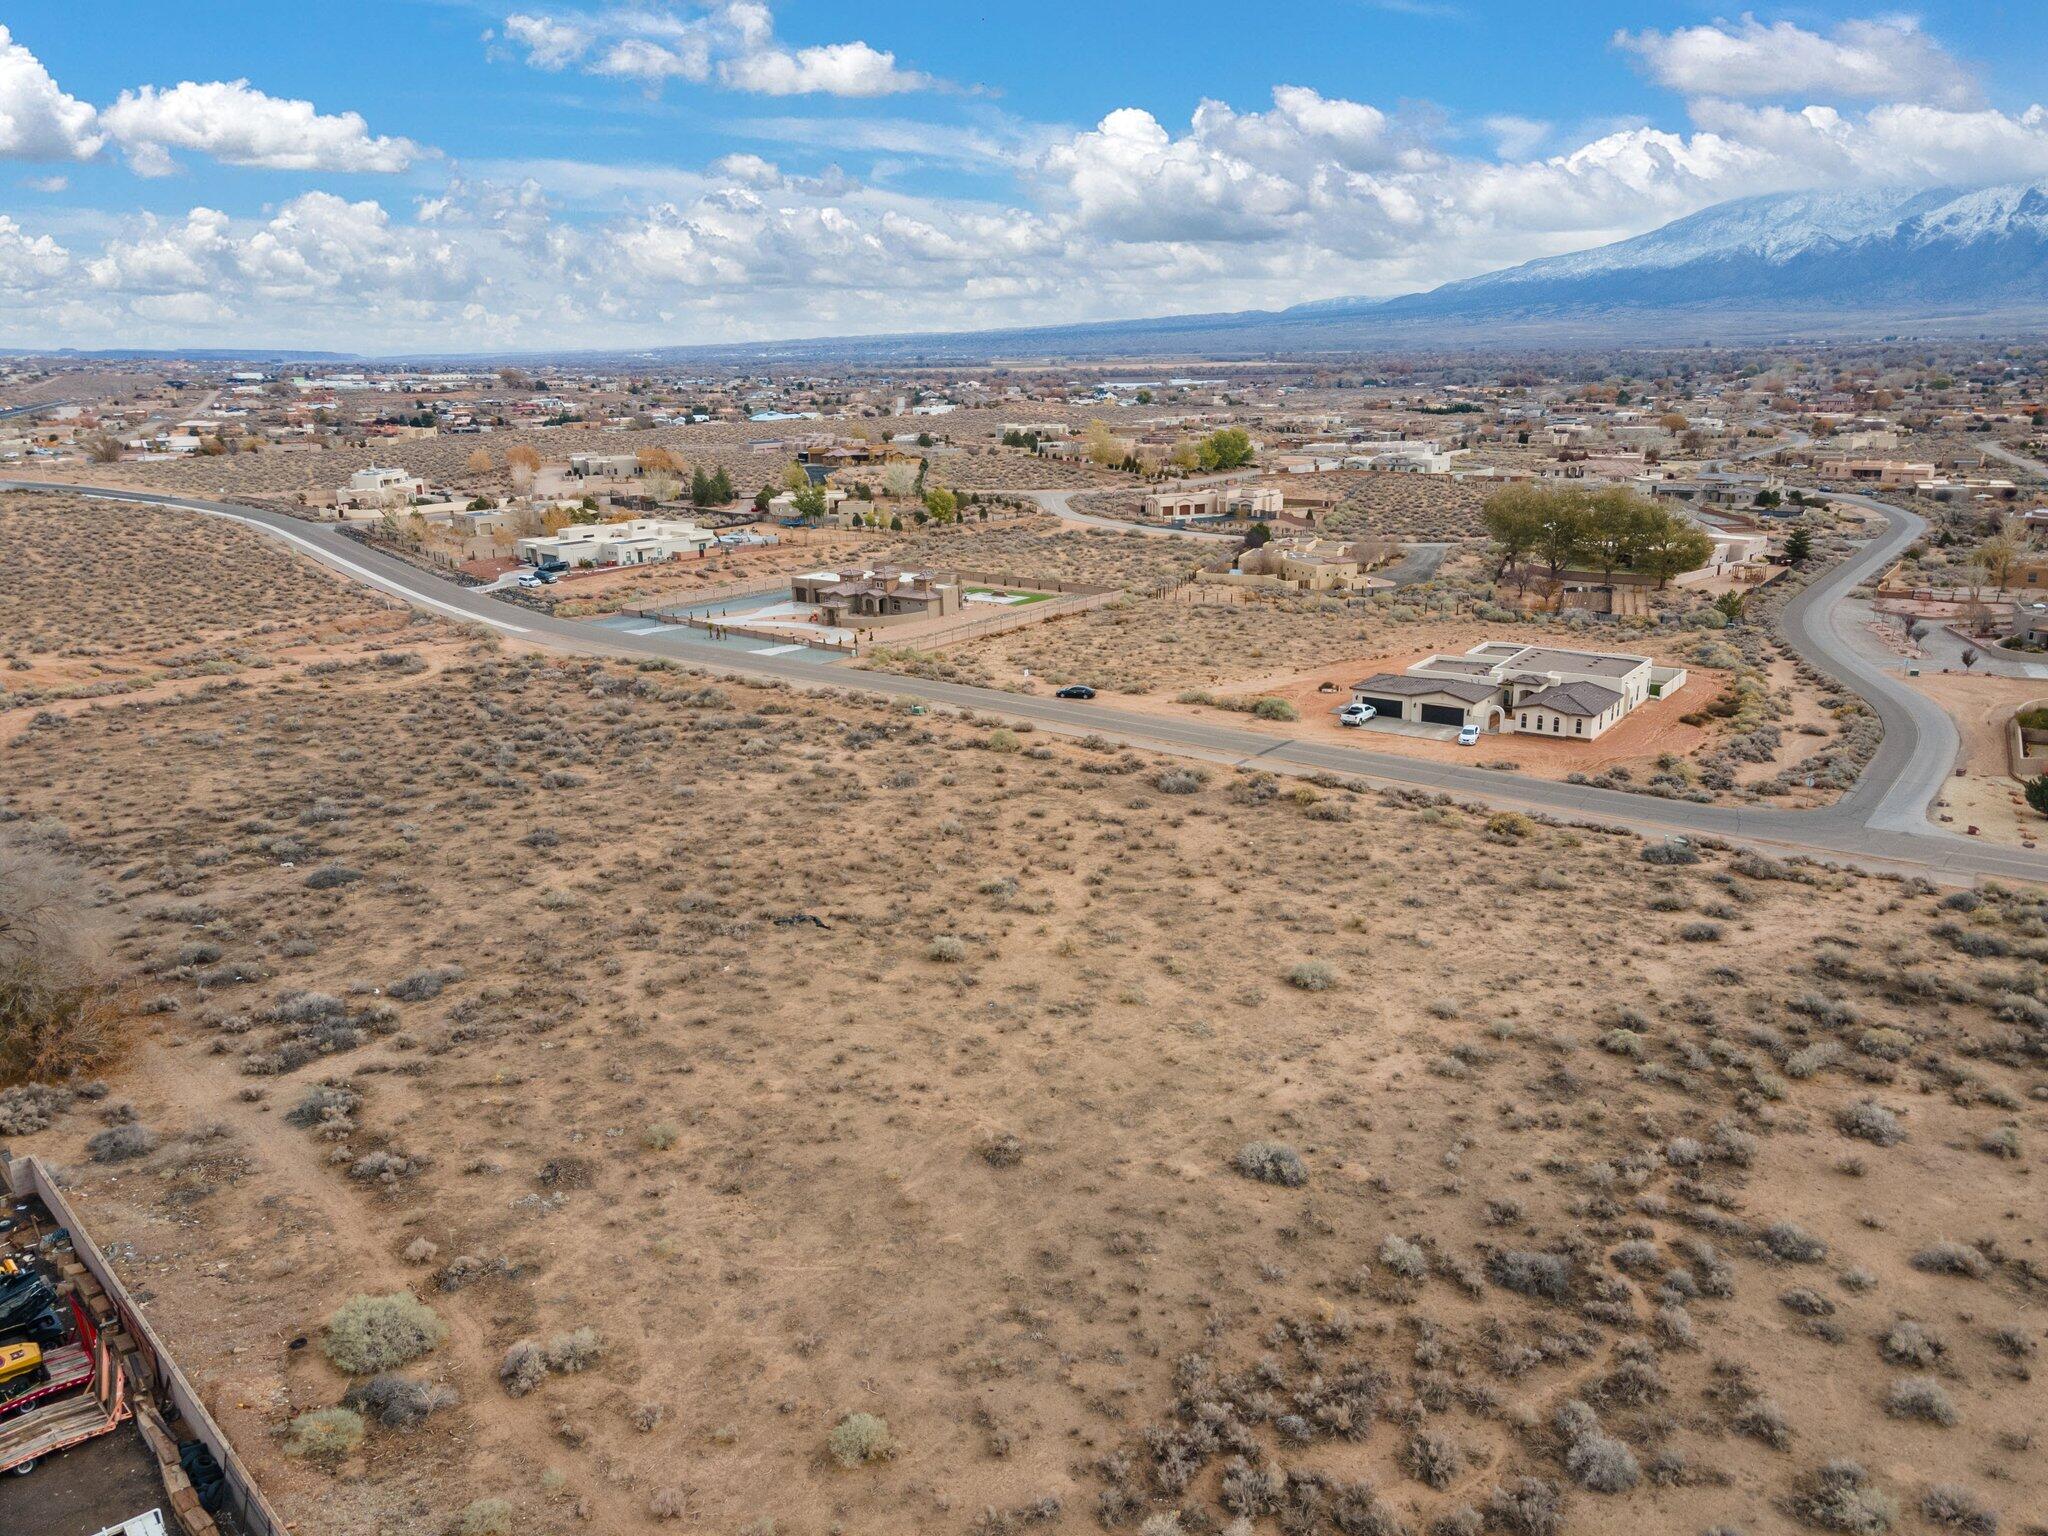 Lot 3 Don Julio Road, Corrales, New Mexico 87048, ,Land,For Sale,Lot 3 Don Julio Road,1053858